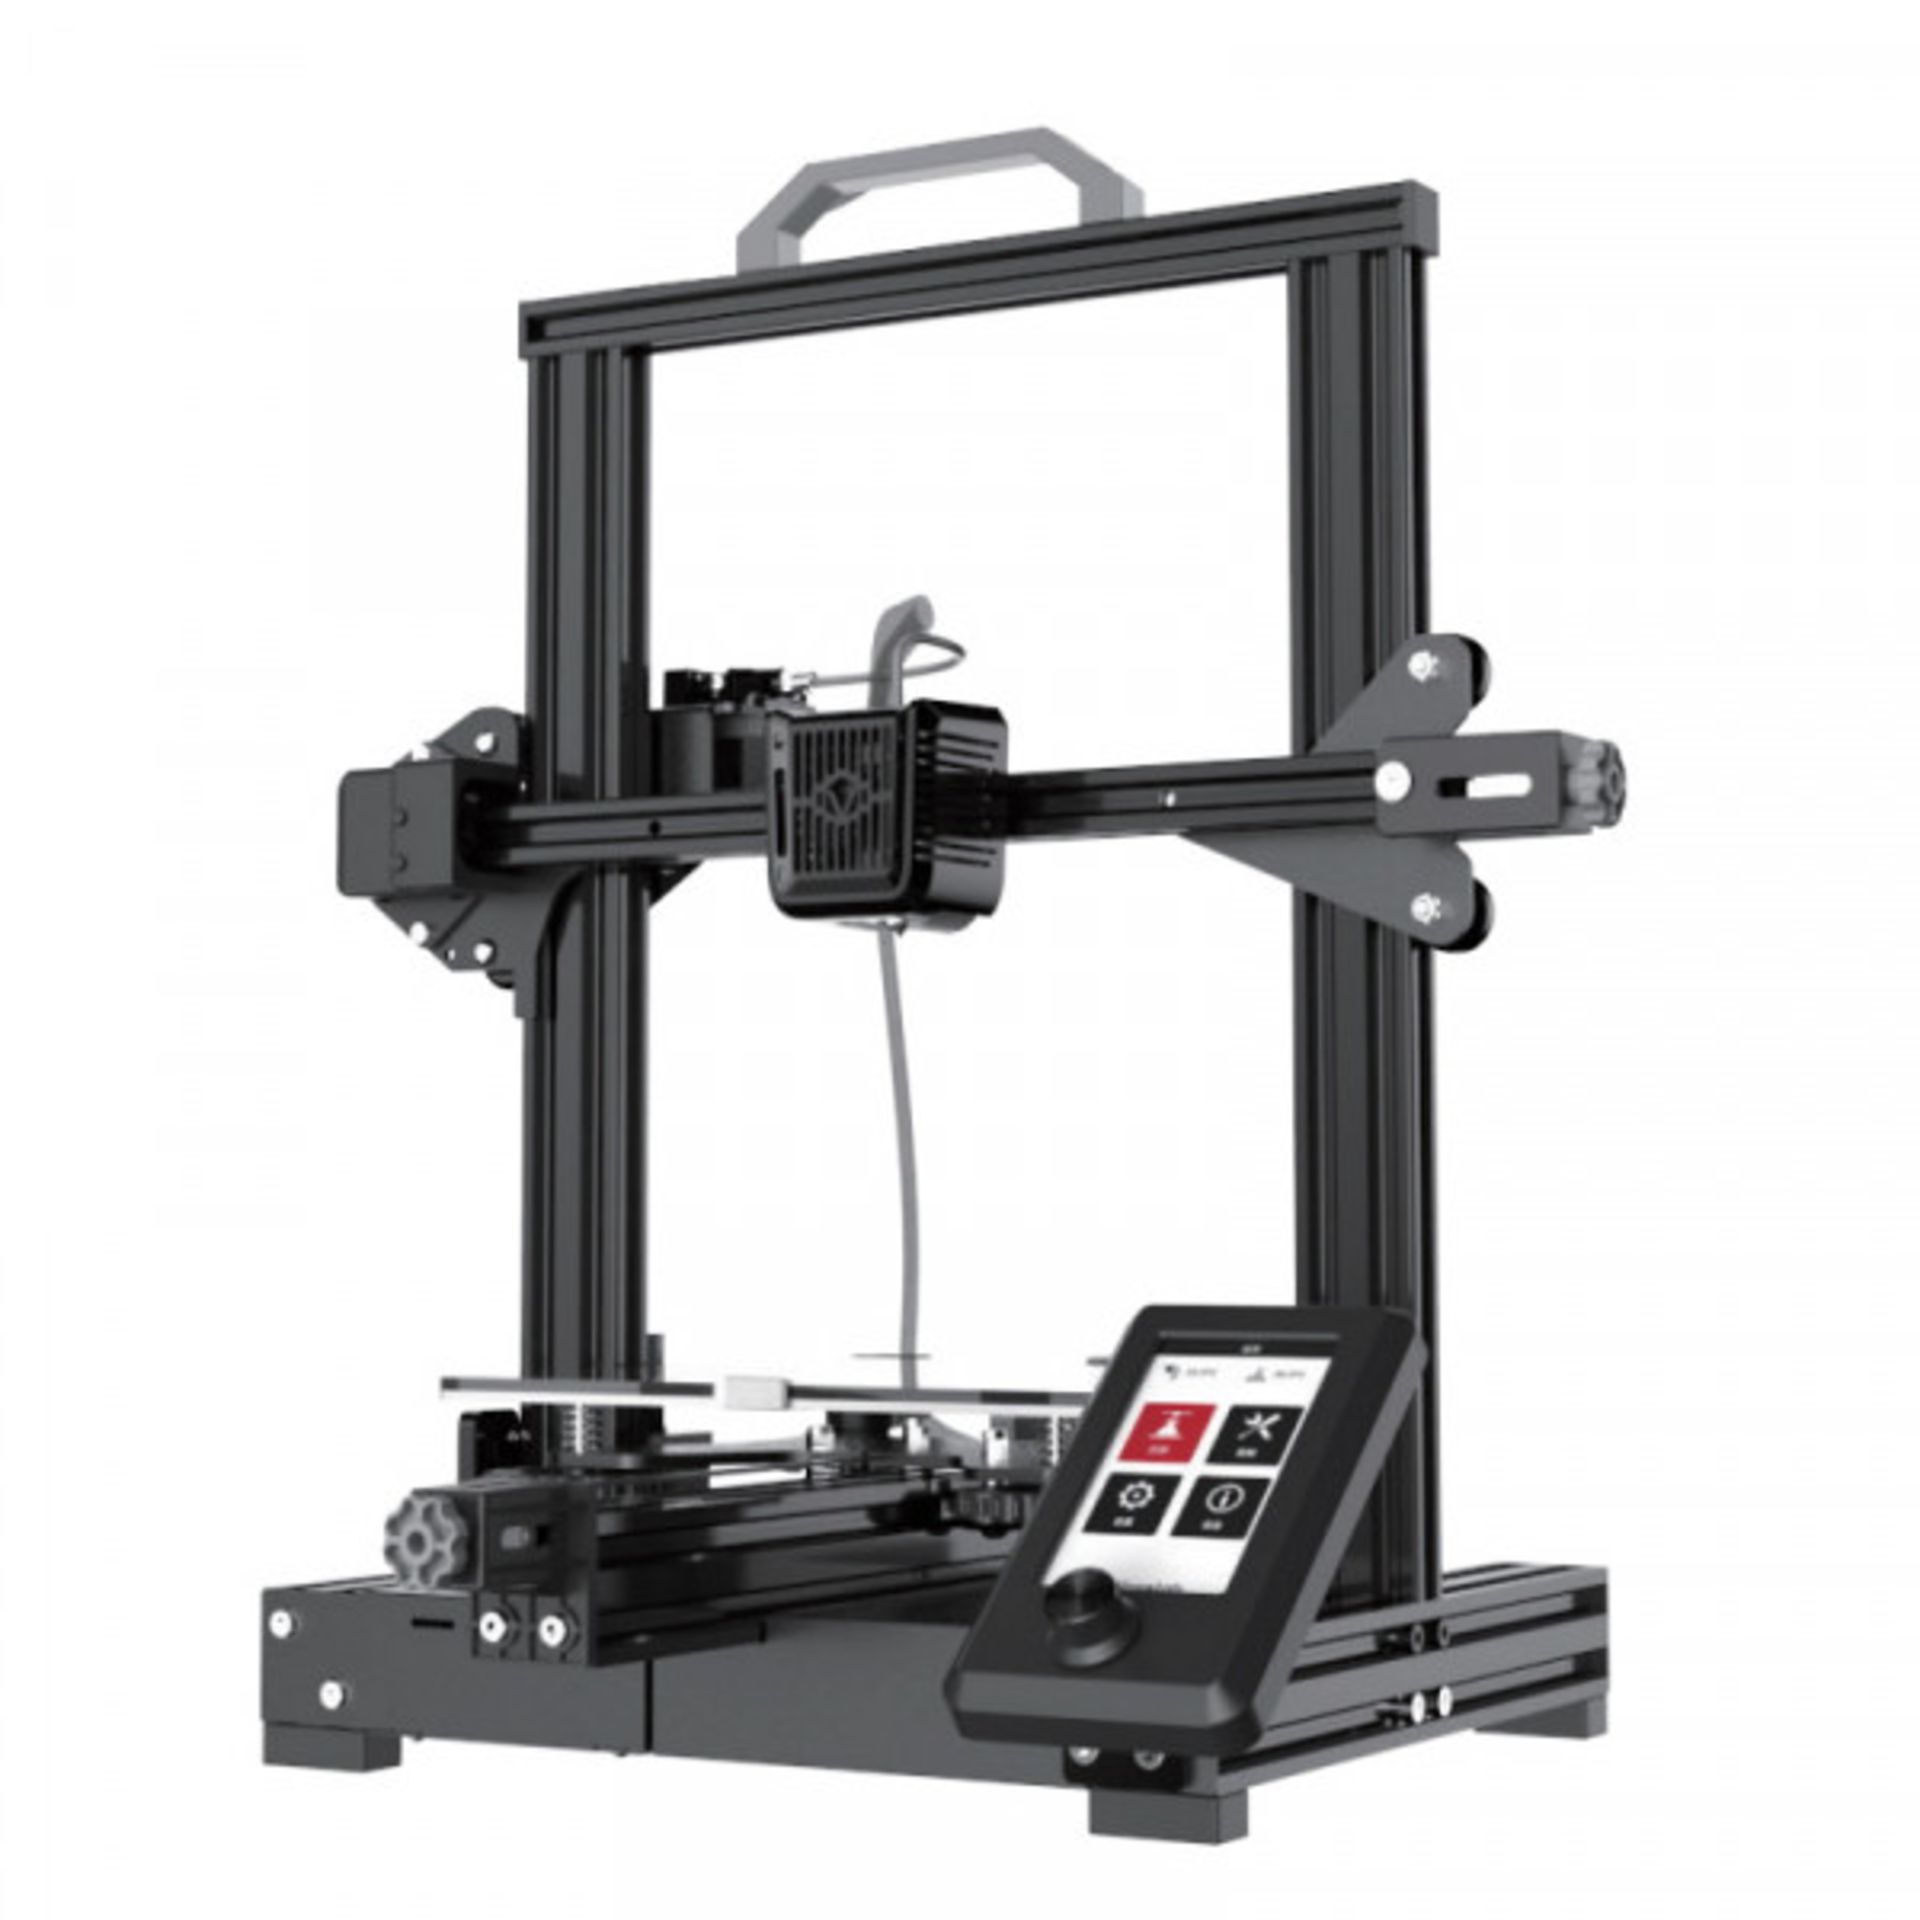 Voxelab Aquila X2 3D Printer. - P2. RRP £450.00. The Voxelab Aquila X2 3D Printer is equipped with a